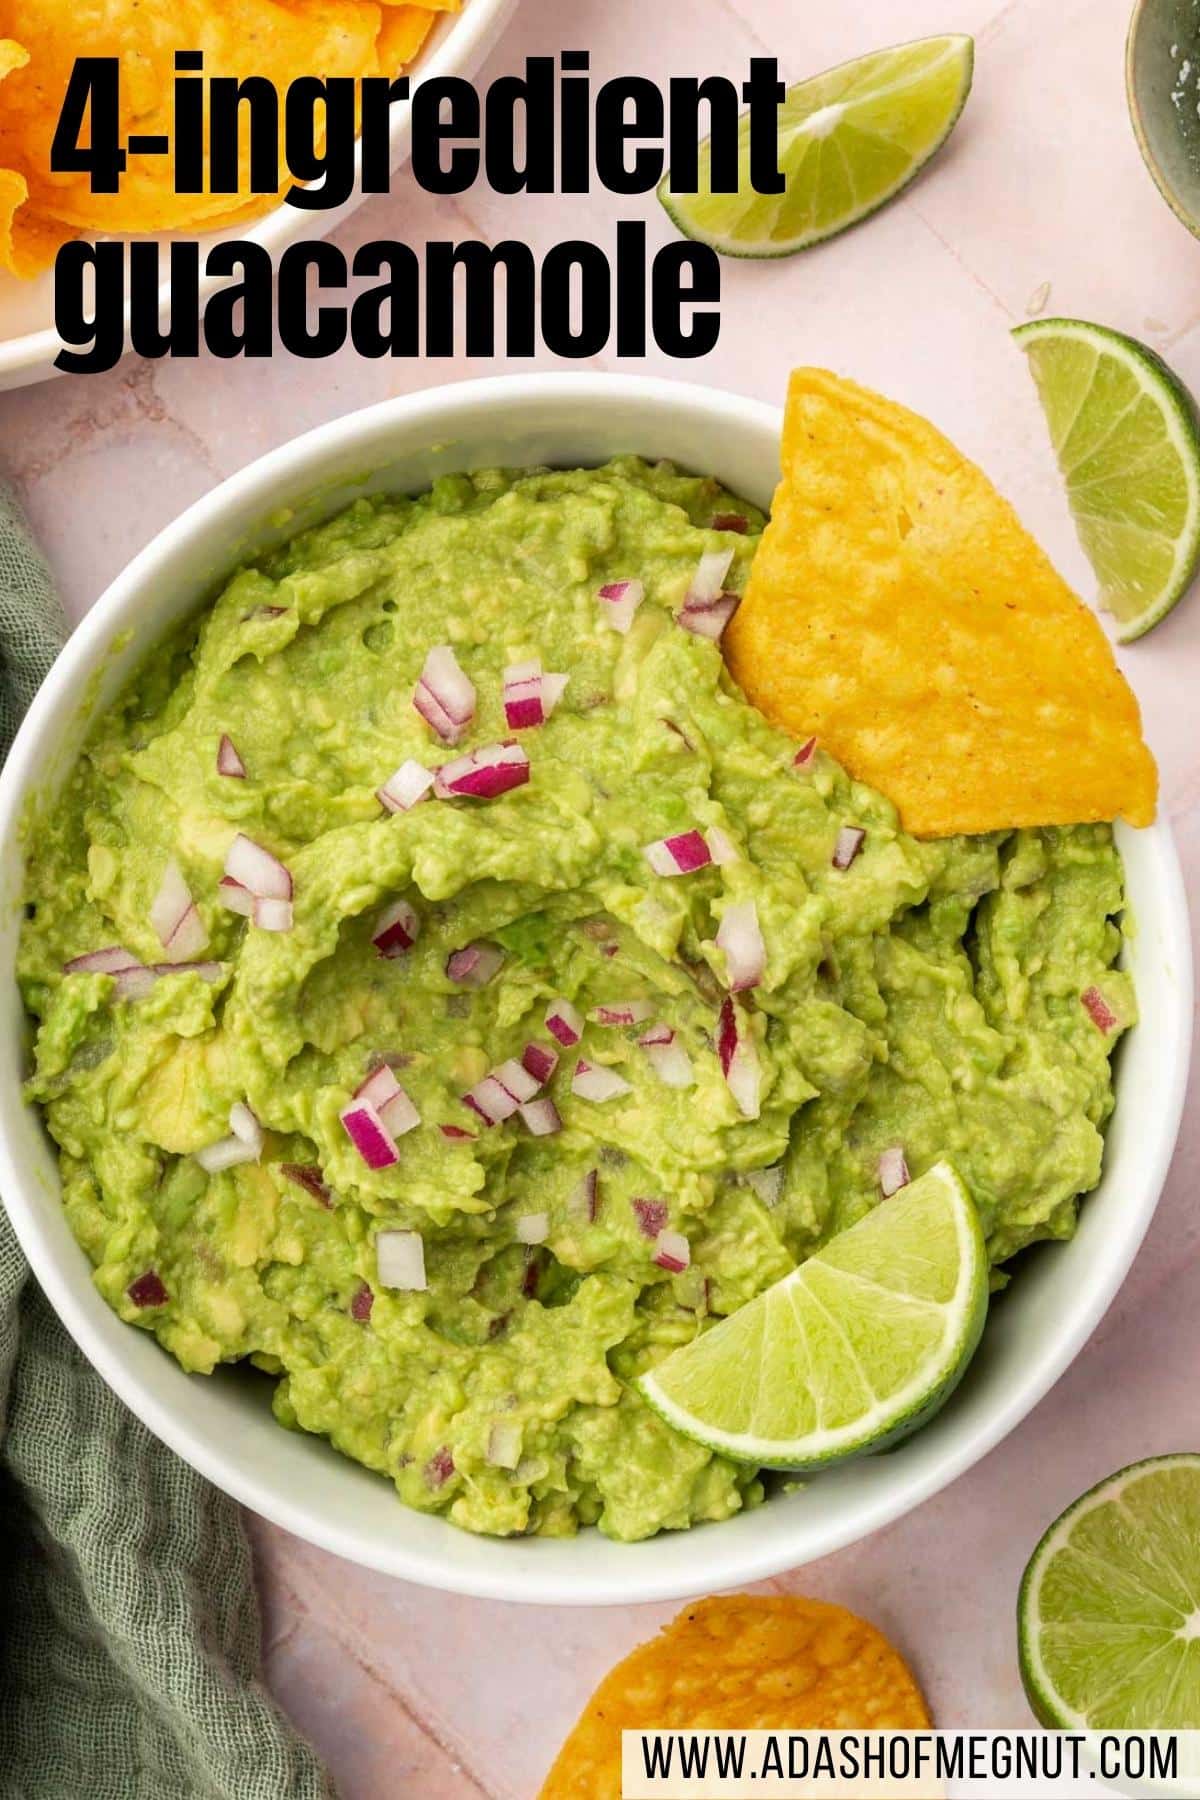 A closeup of a bowl of guacamole topped with a lime wedge, diced red onion, and a tortilla chip.